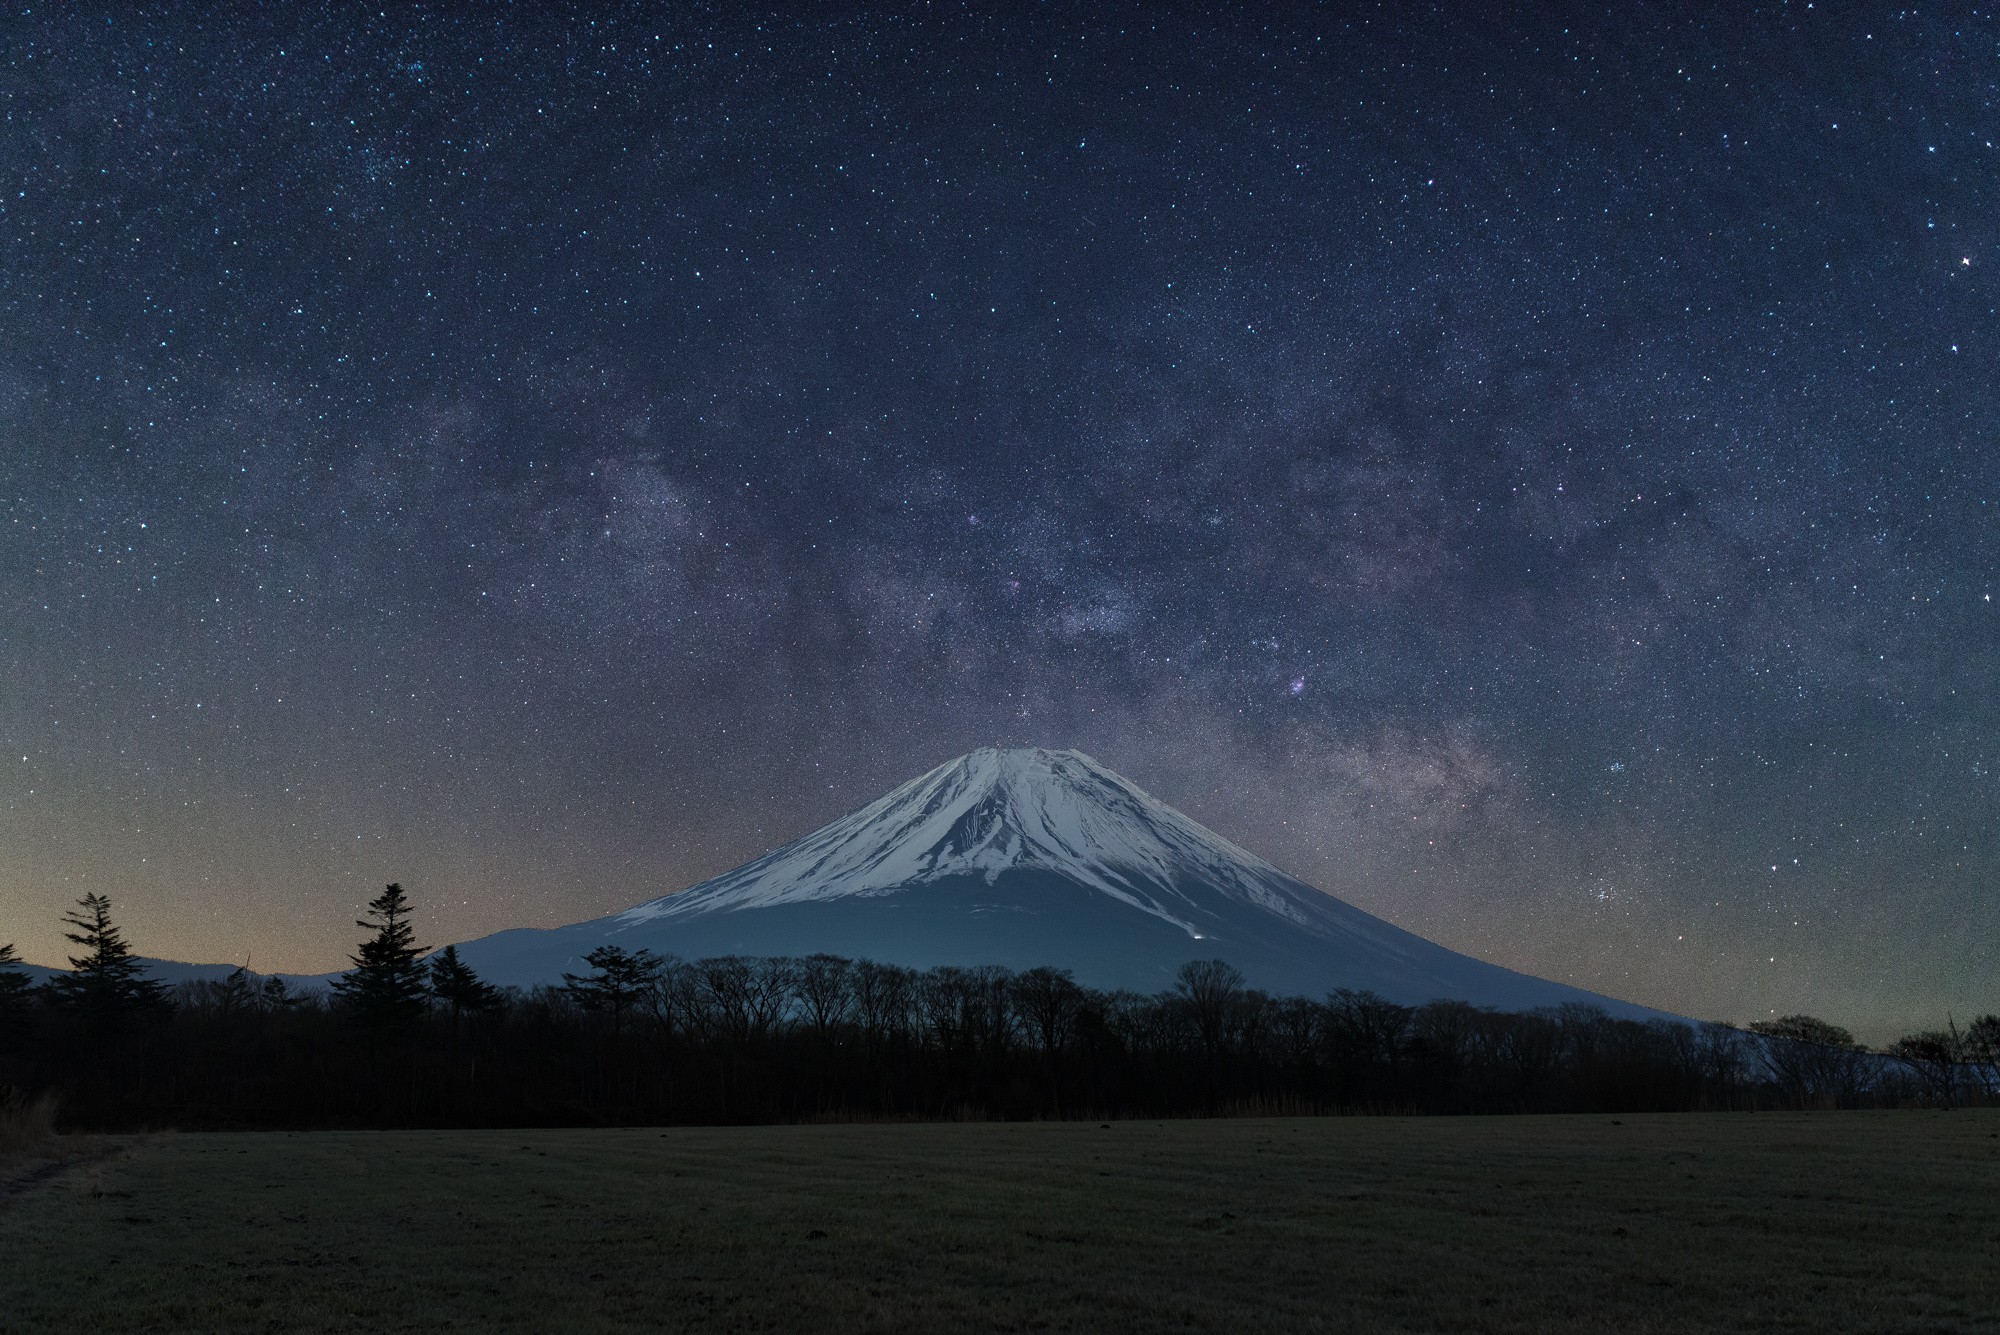 General 2000x1335 Mount Fuji nature mountains sky Japan night stars Asia volcano outdoors landscape